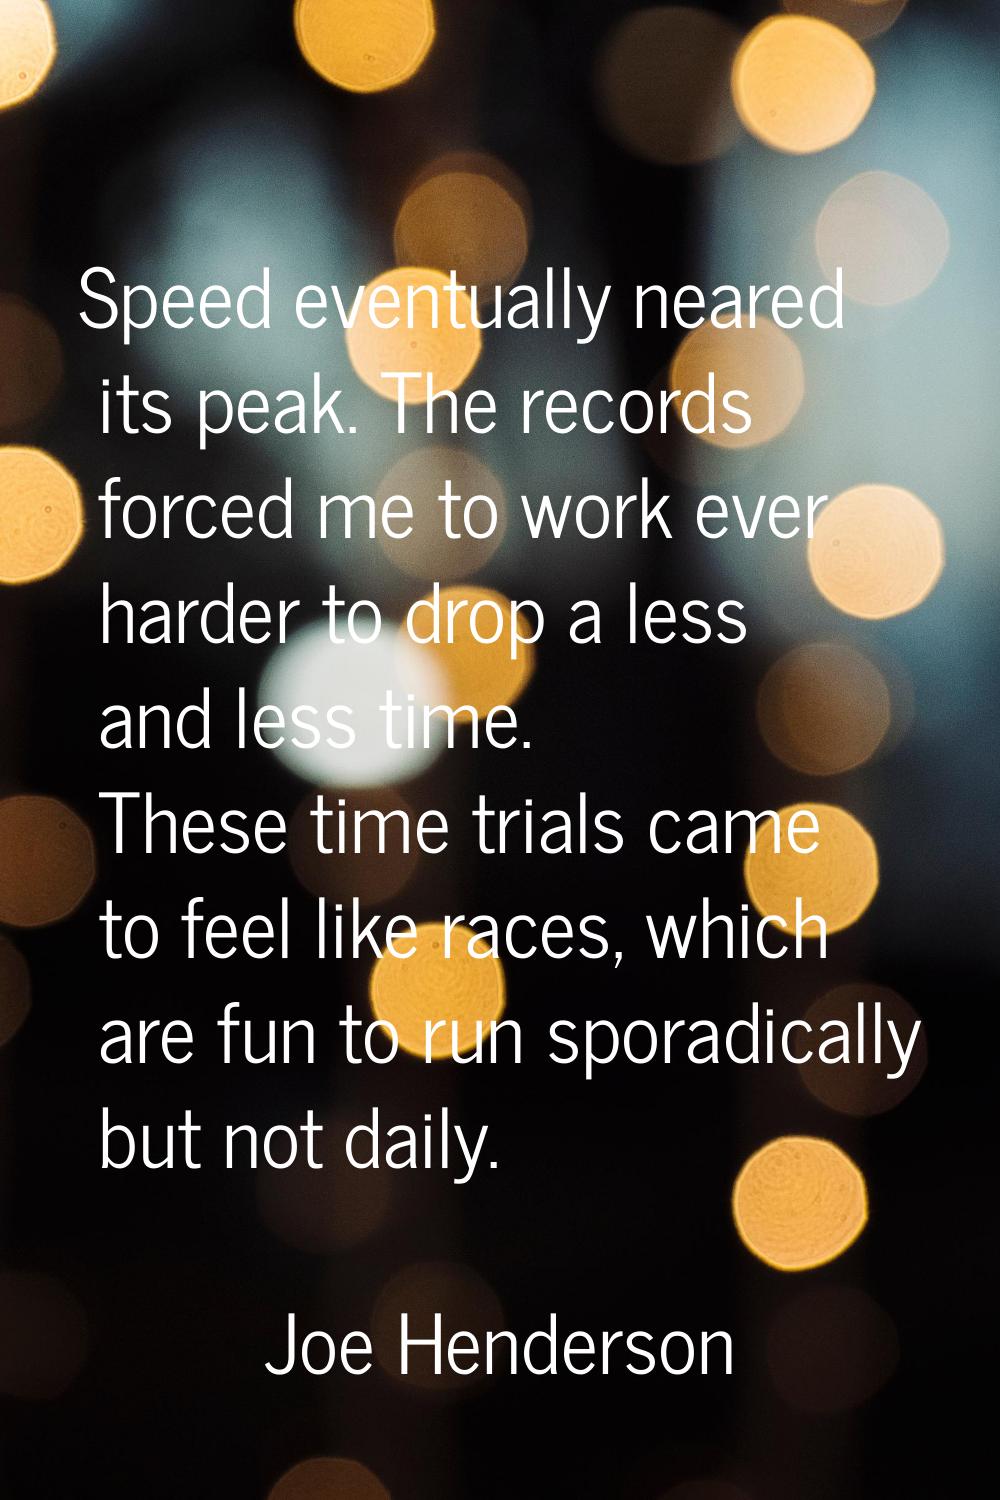 Speed eventually neared its peak. The records forced me to work ever harder to drop a less and less